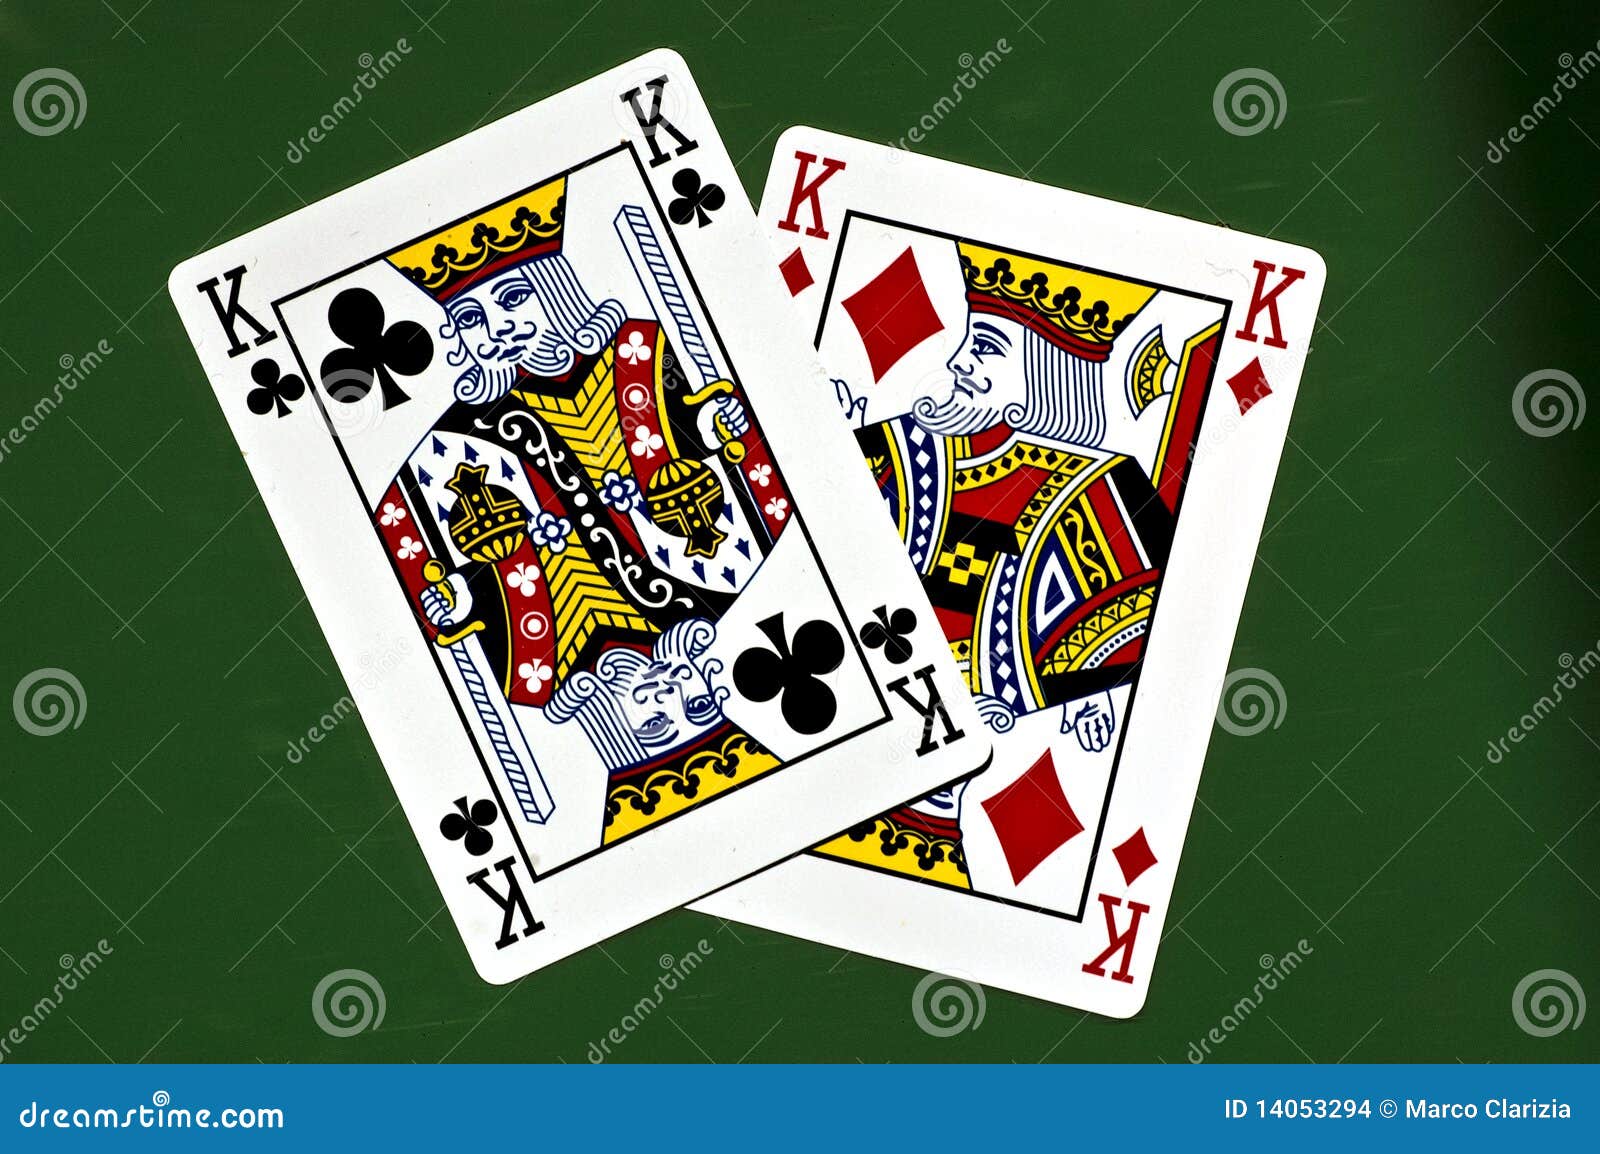 Hand in foreground holding pair of kings in poker